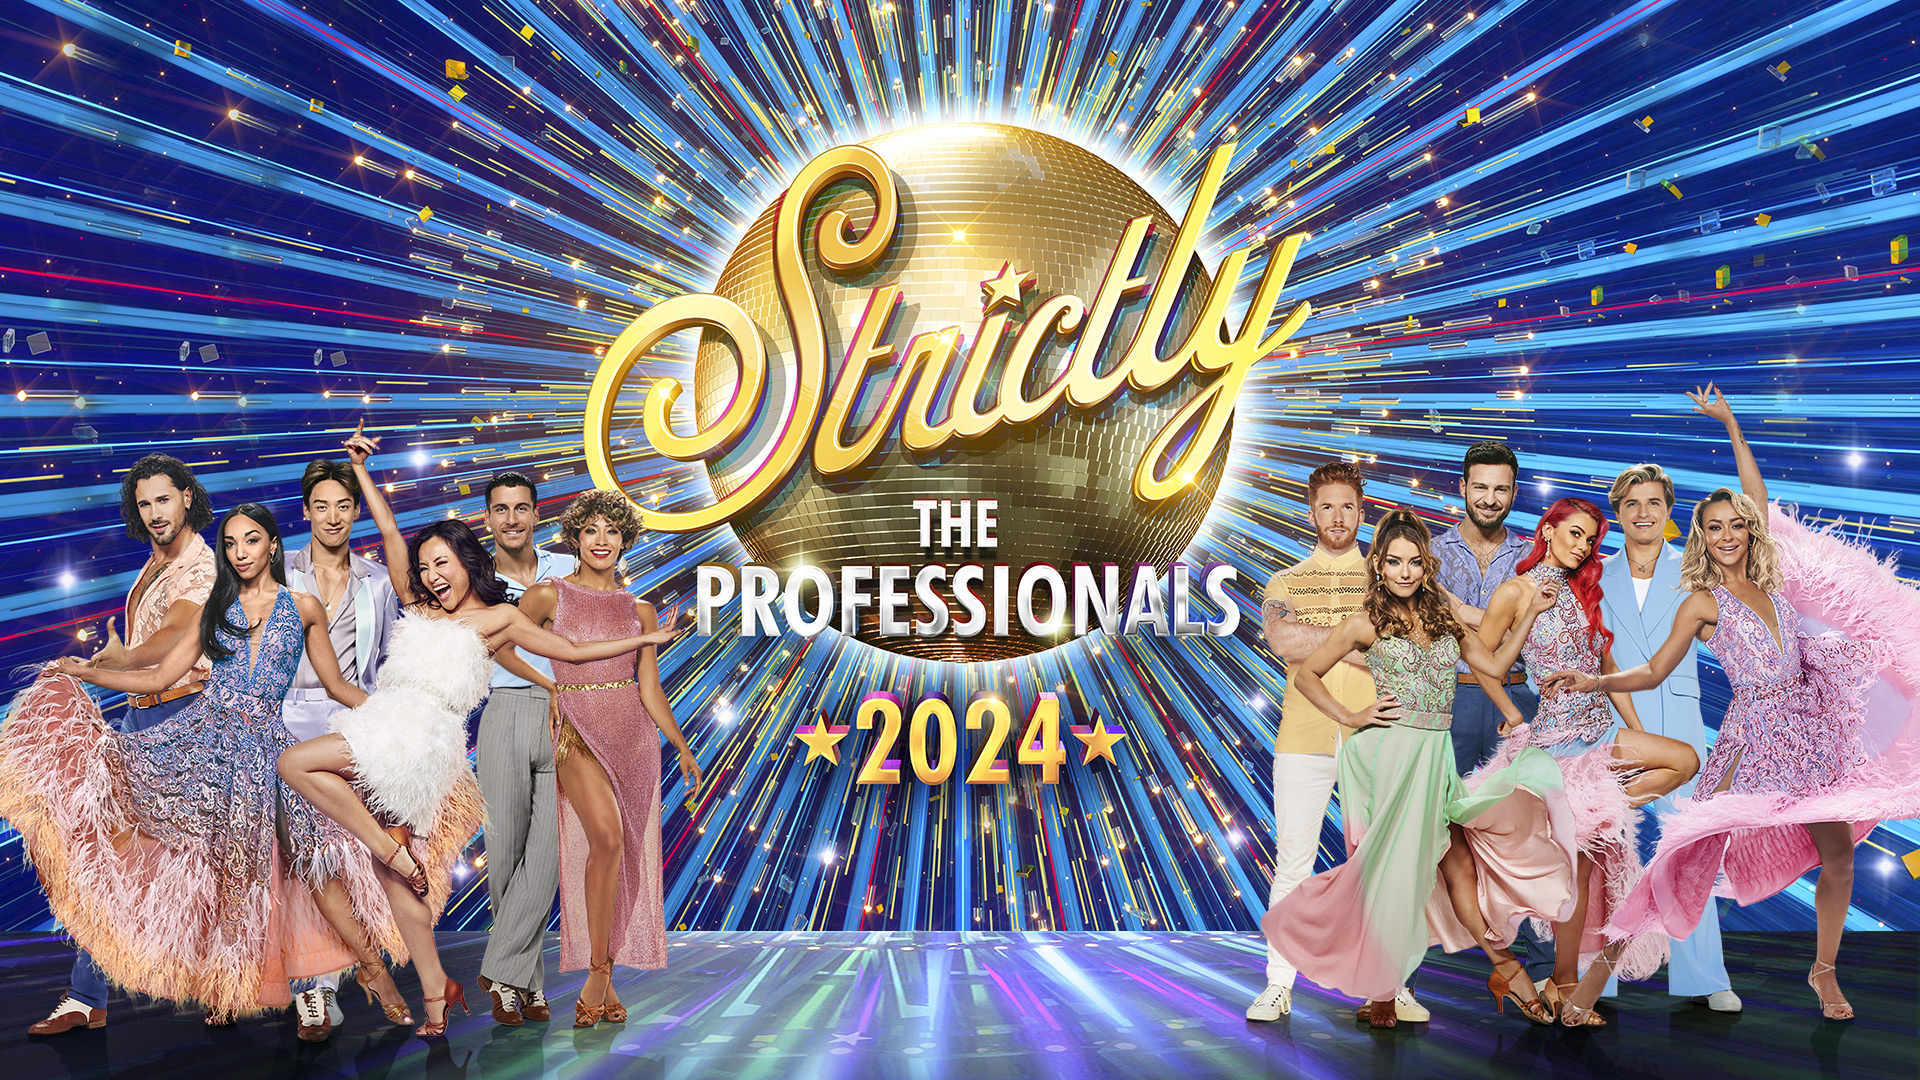 Strictly Come Dancing The Professionals tour poster